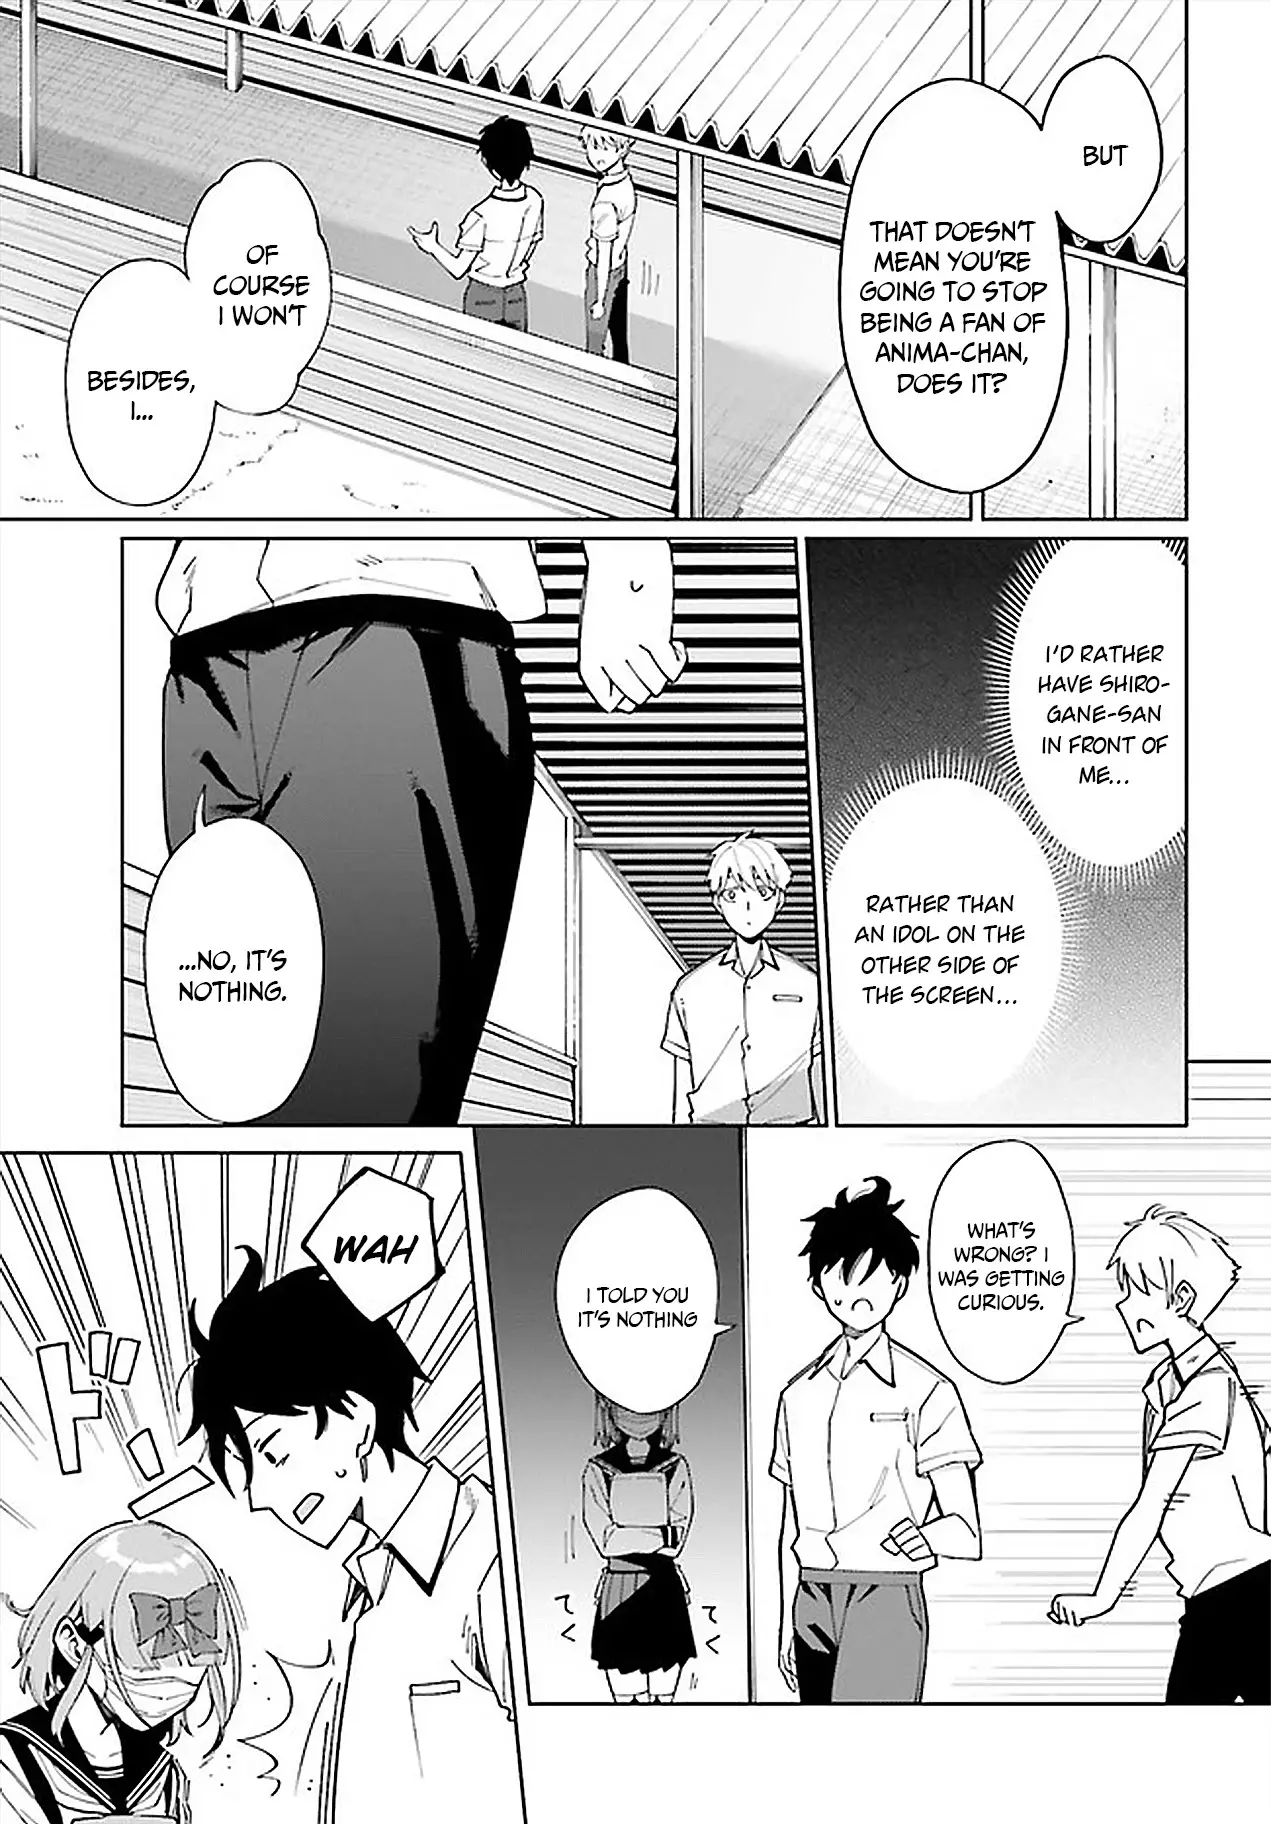 I Don't Understand Shirogane-San's Facial Expression At All - 6 page 12